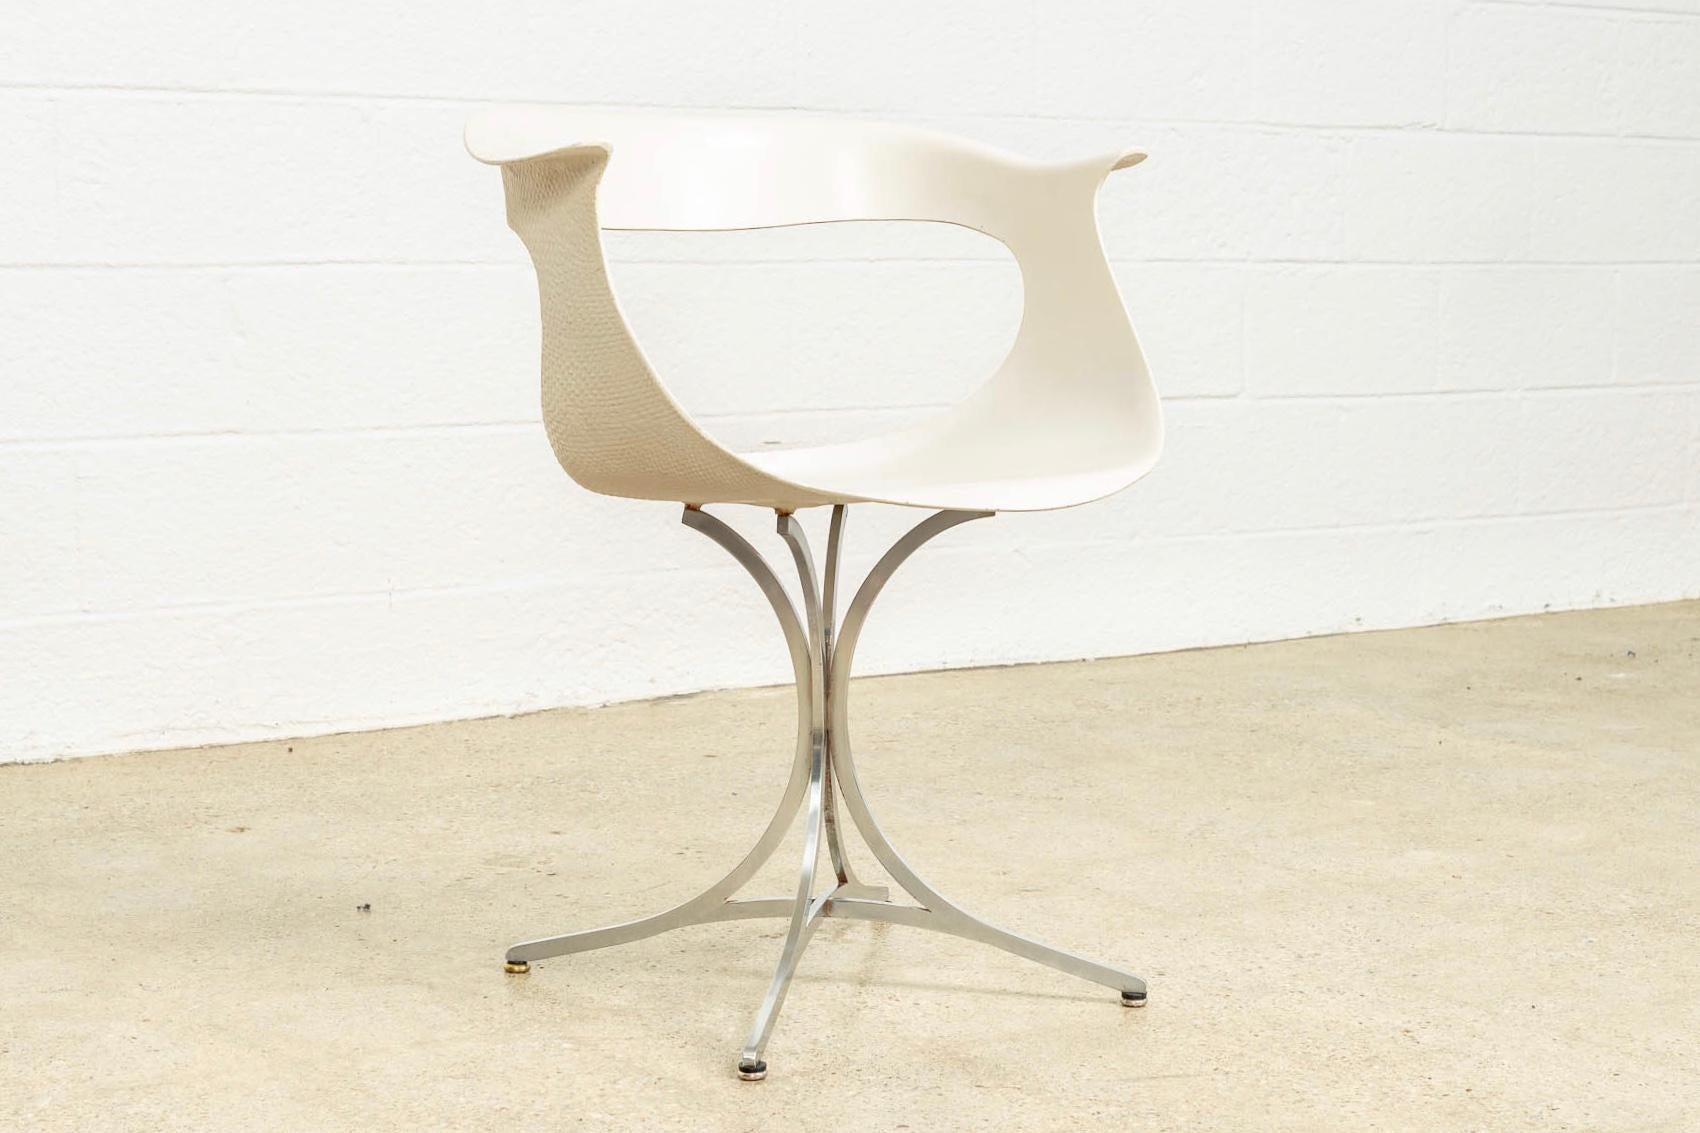 This vintage Mid-Century Modern “Lotus” white on chrome armchair was designed by American husband and wife team Erwine and Estelle Laverne for Laverne International circa 1950. The iconic design features clean lines and elegant curves. The